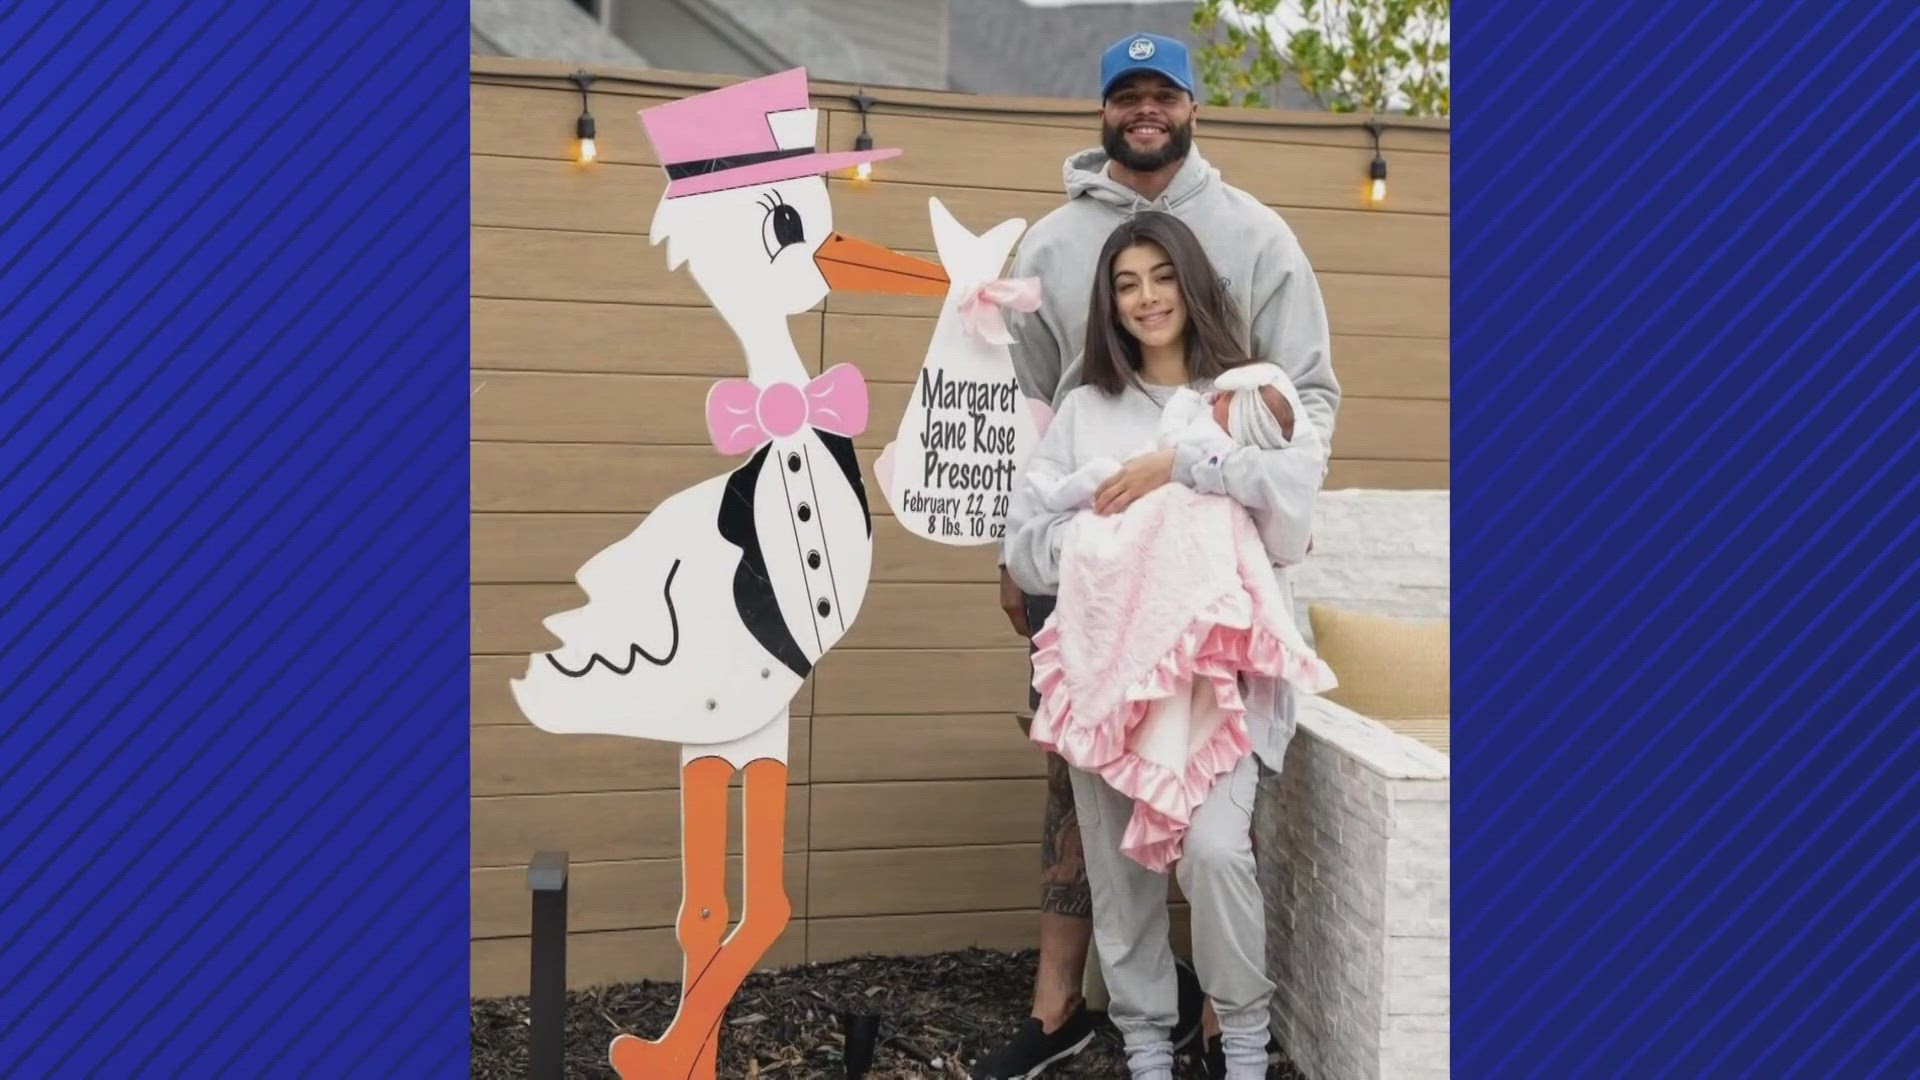 The couple welcomed baby MJ Rose on February 29.